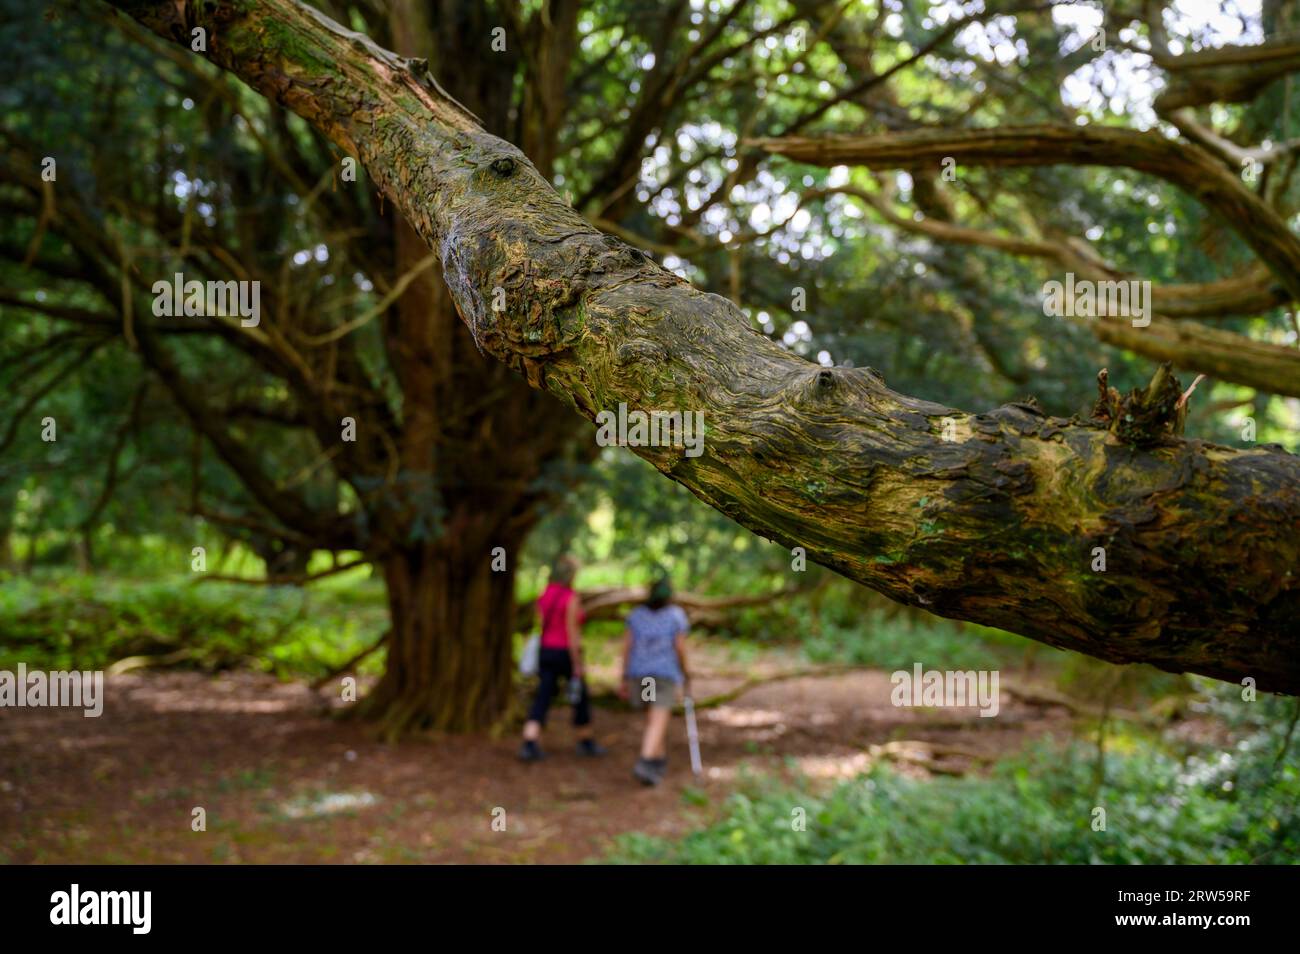 Yew tree in the ancient Kingley Vale yew forest with trees estimated up to or around 1000 years old. West Sussex, England. Stock Photo